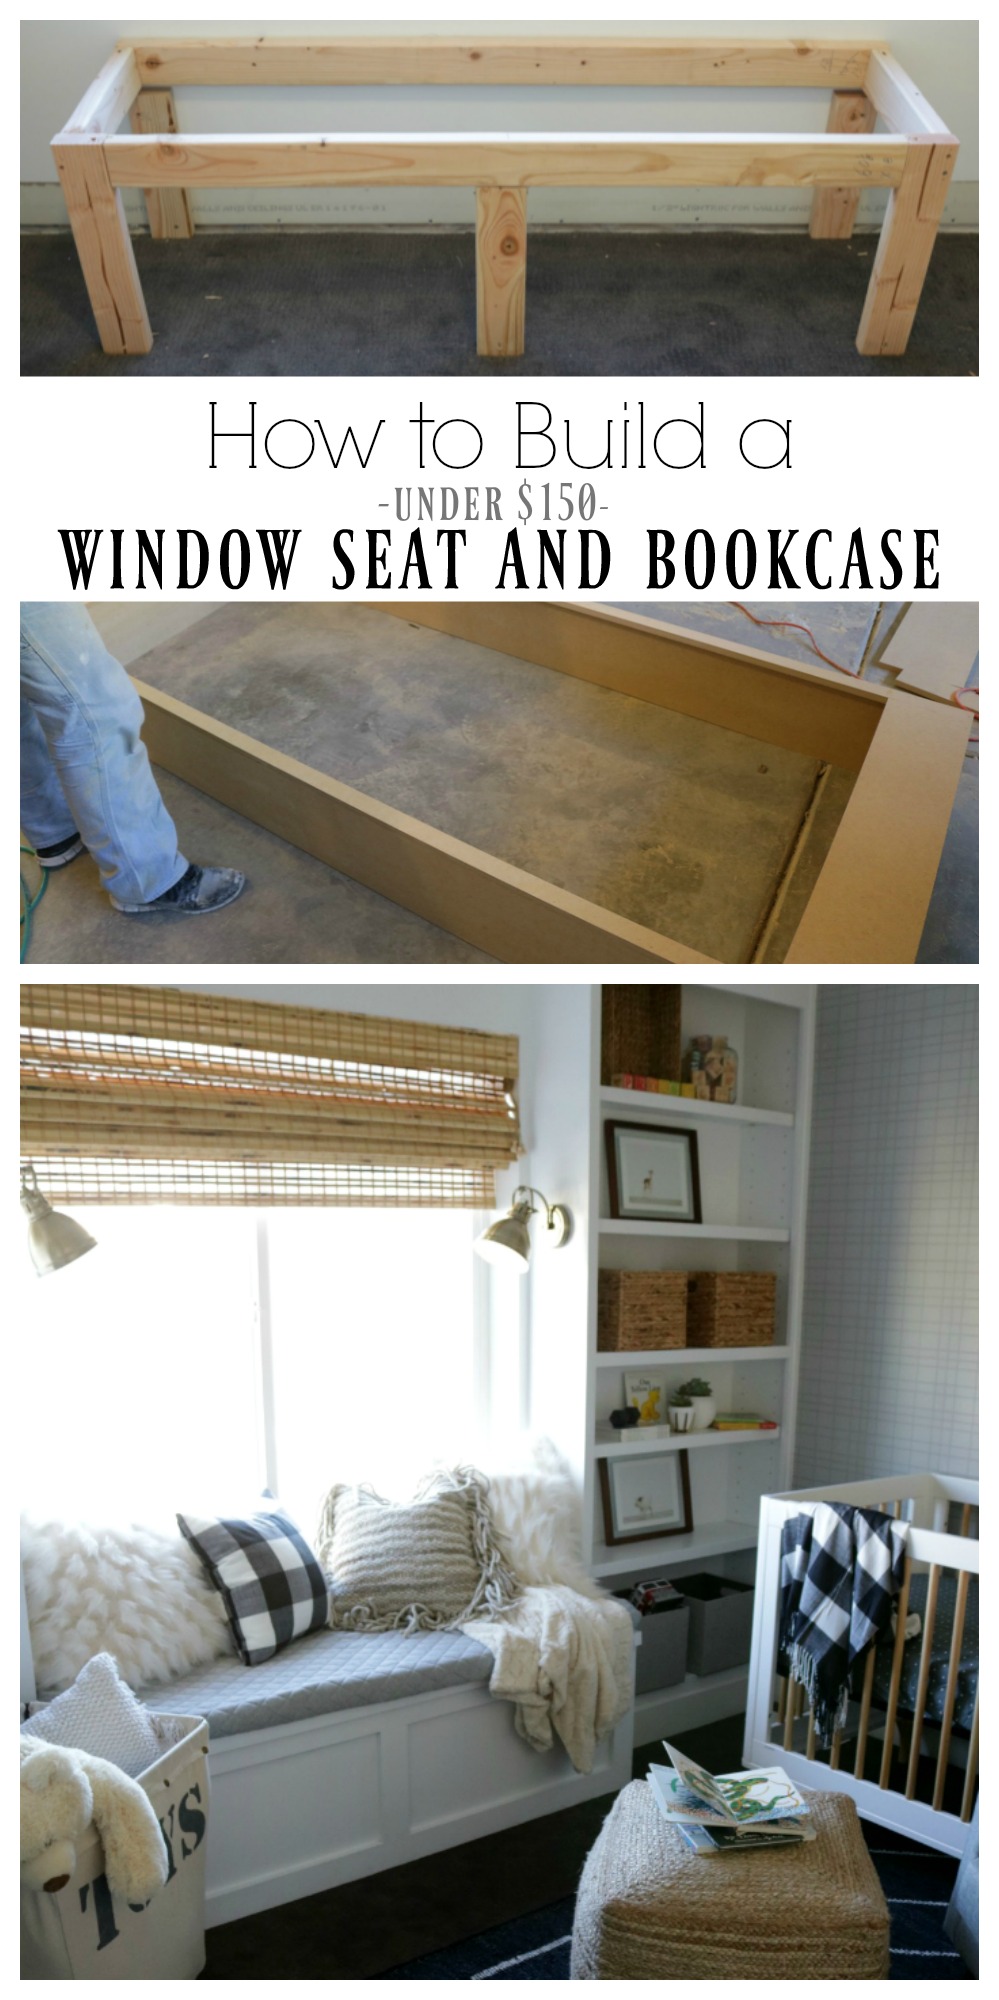 How to Build a Window Seat and Bookcase under $150